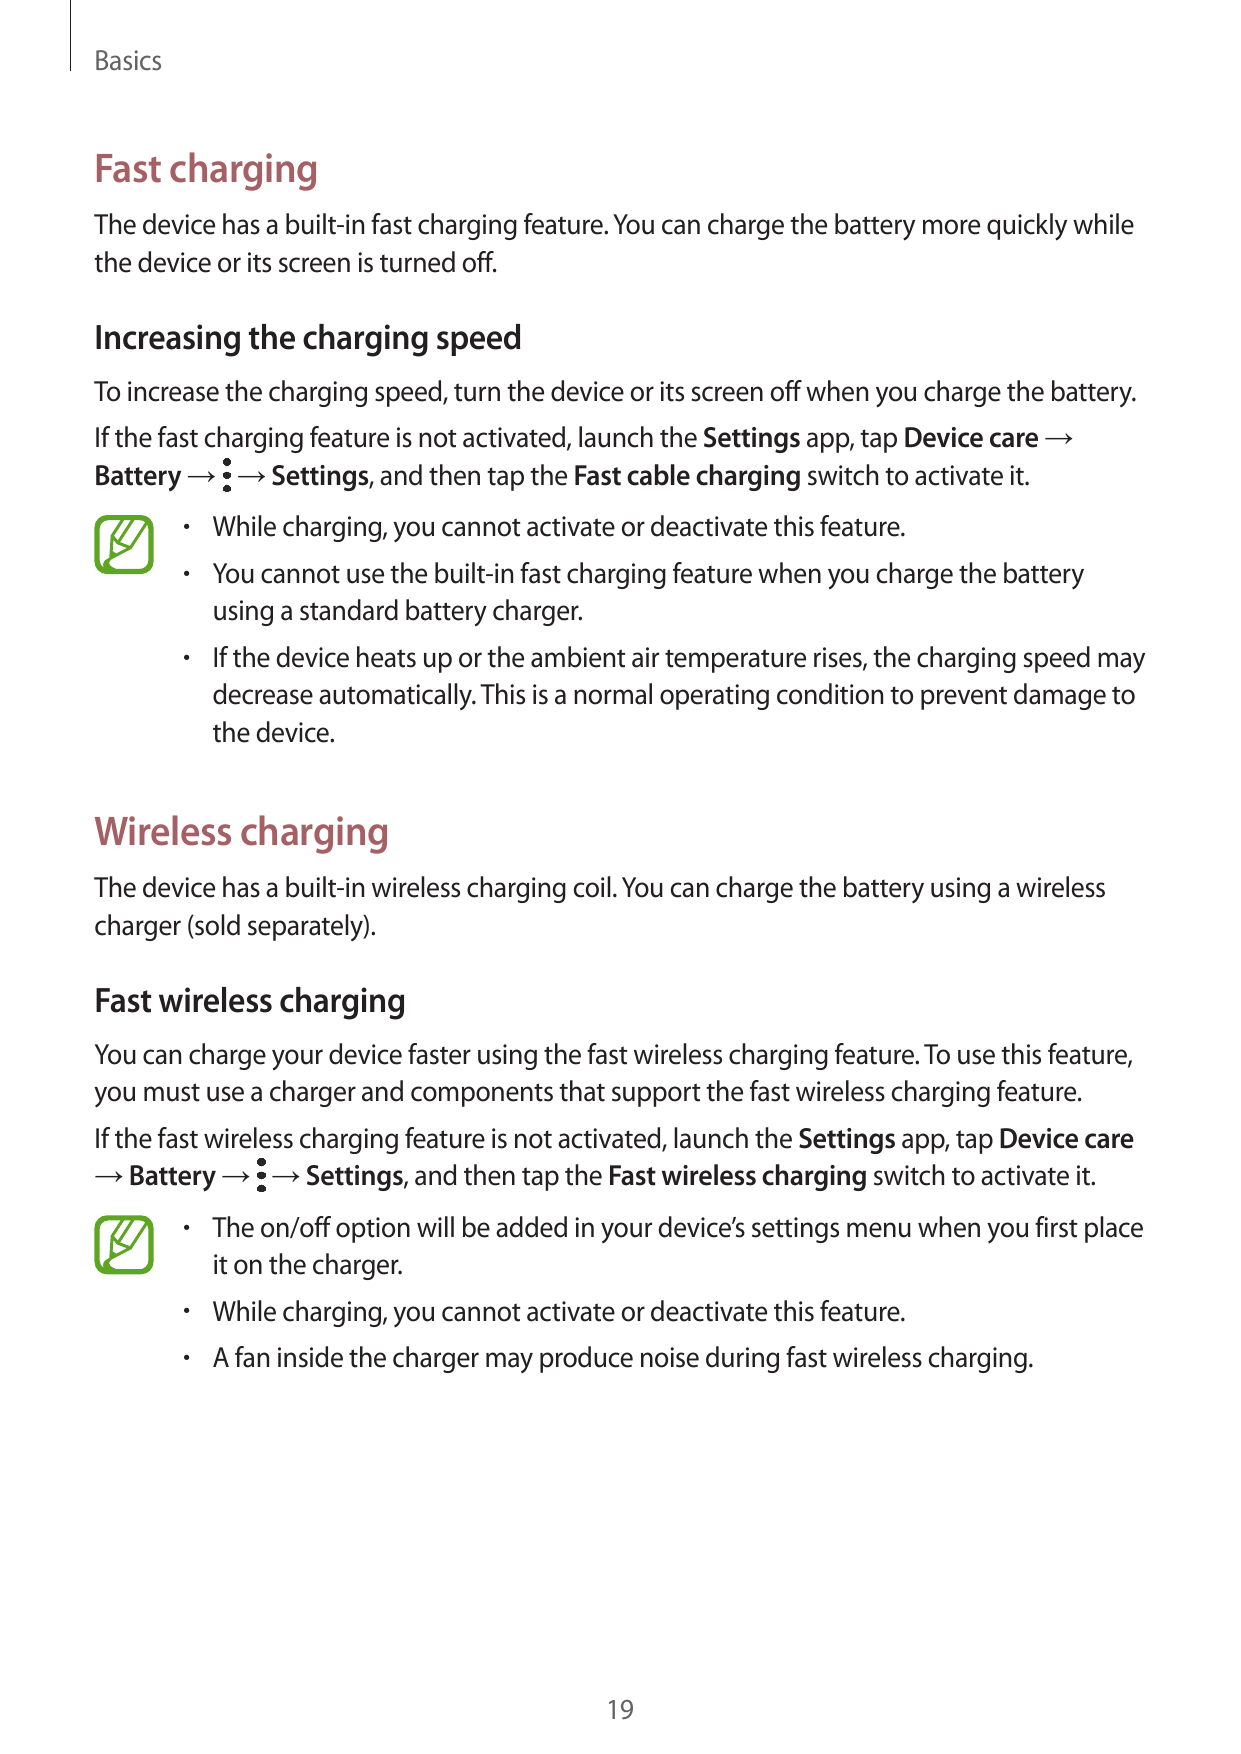 BasicsFast chargingThe device has a built-in fast charging feature. You can charge the battery more quickly whilethe device or i